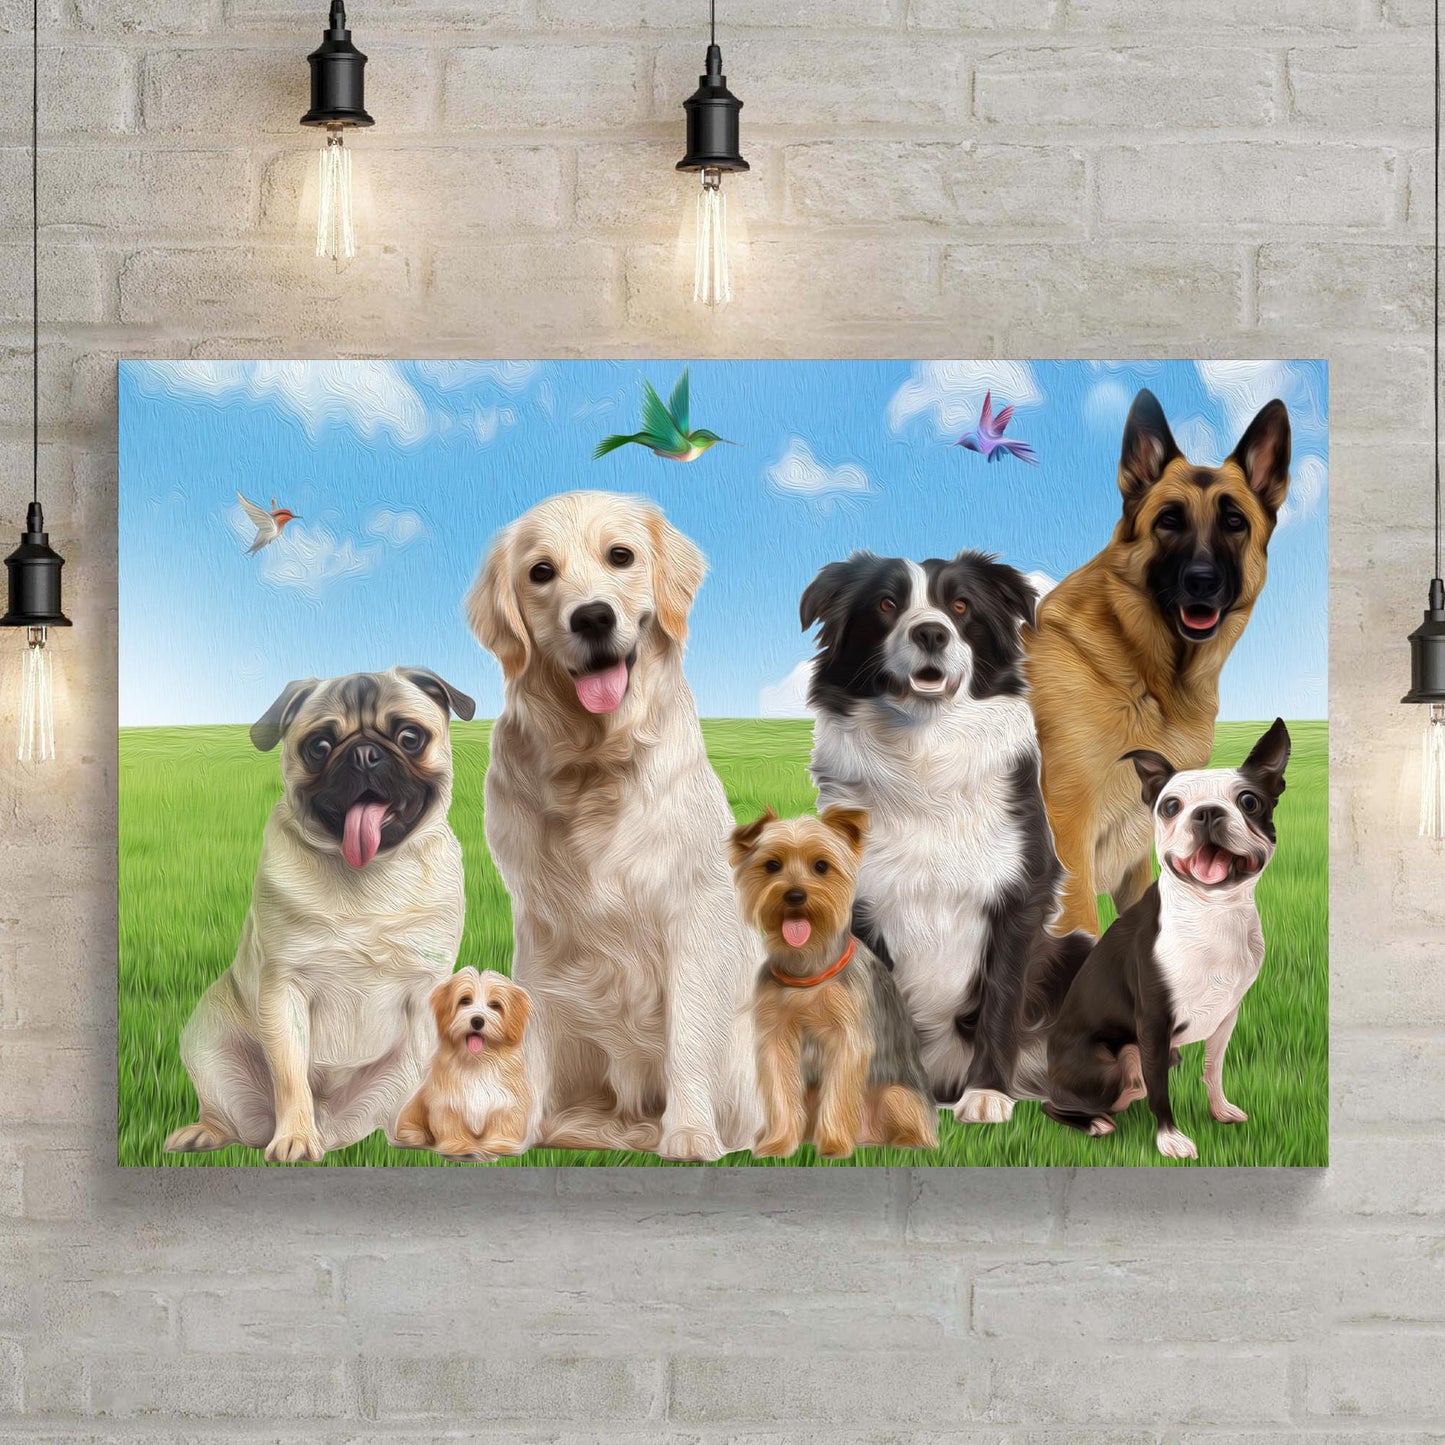 Happy Dogs Pet Canvas Wall Art - Image by Tailored Canvases